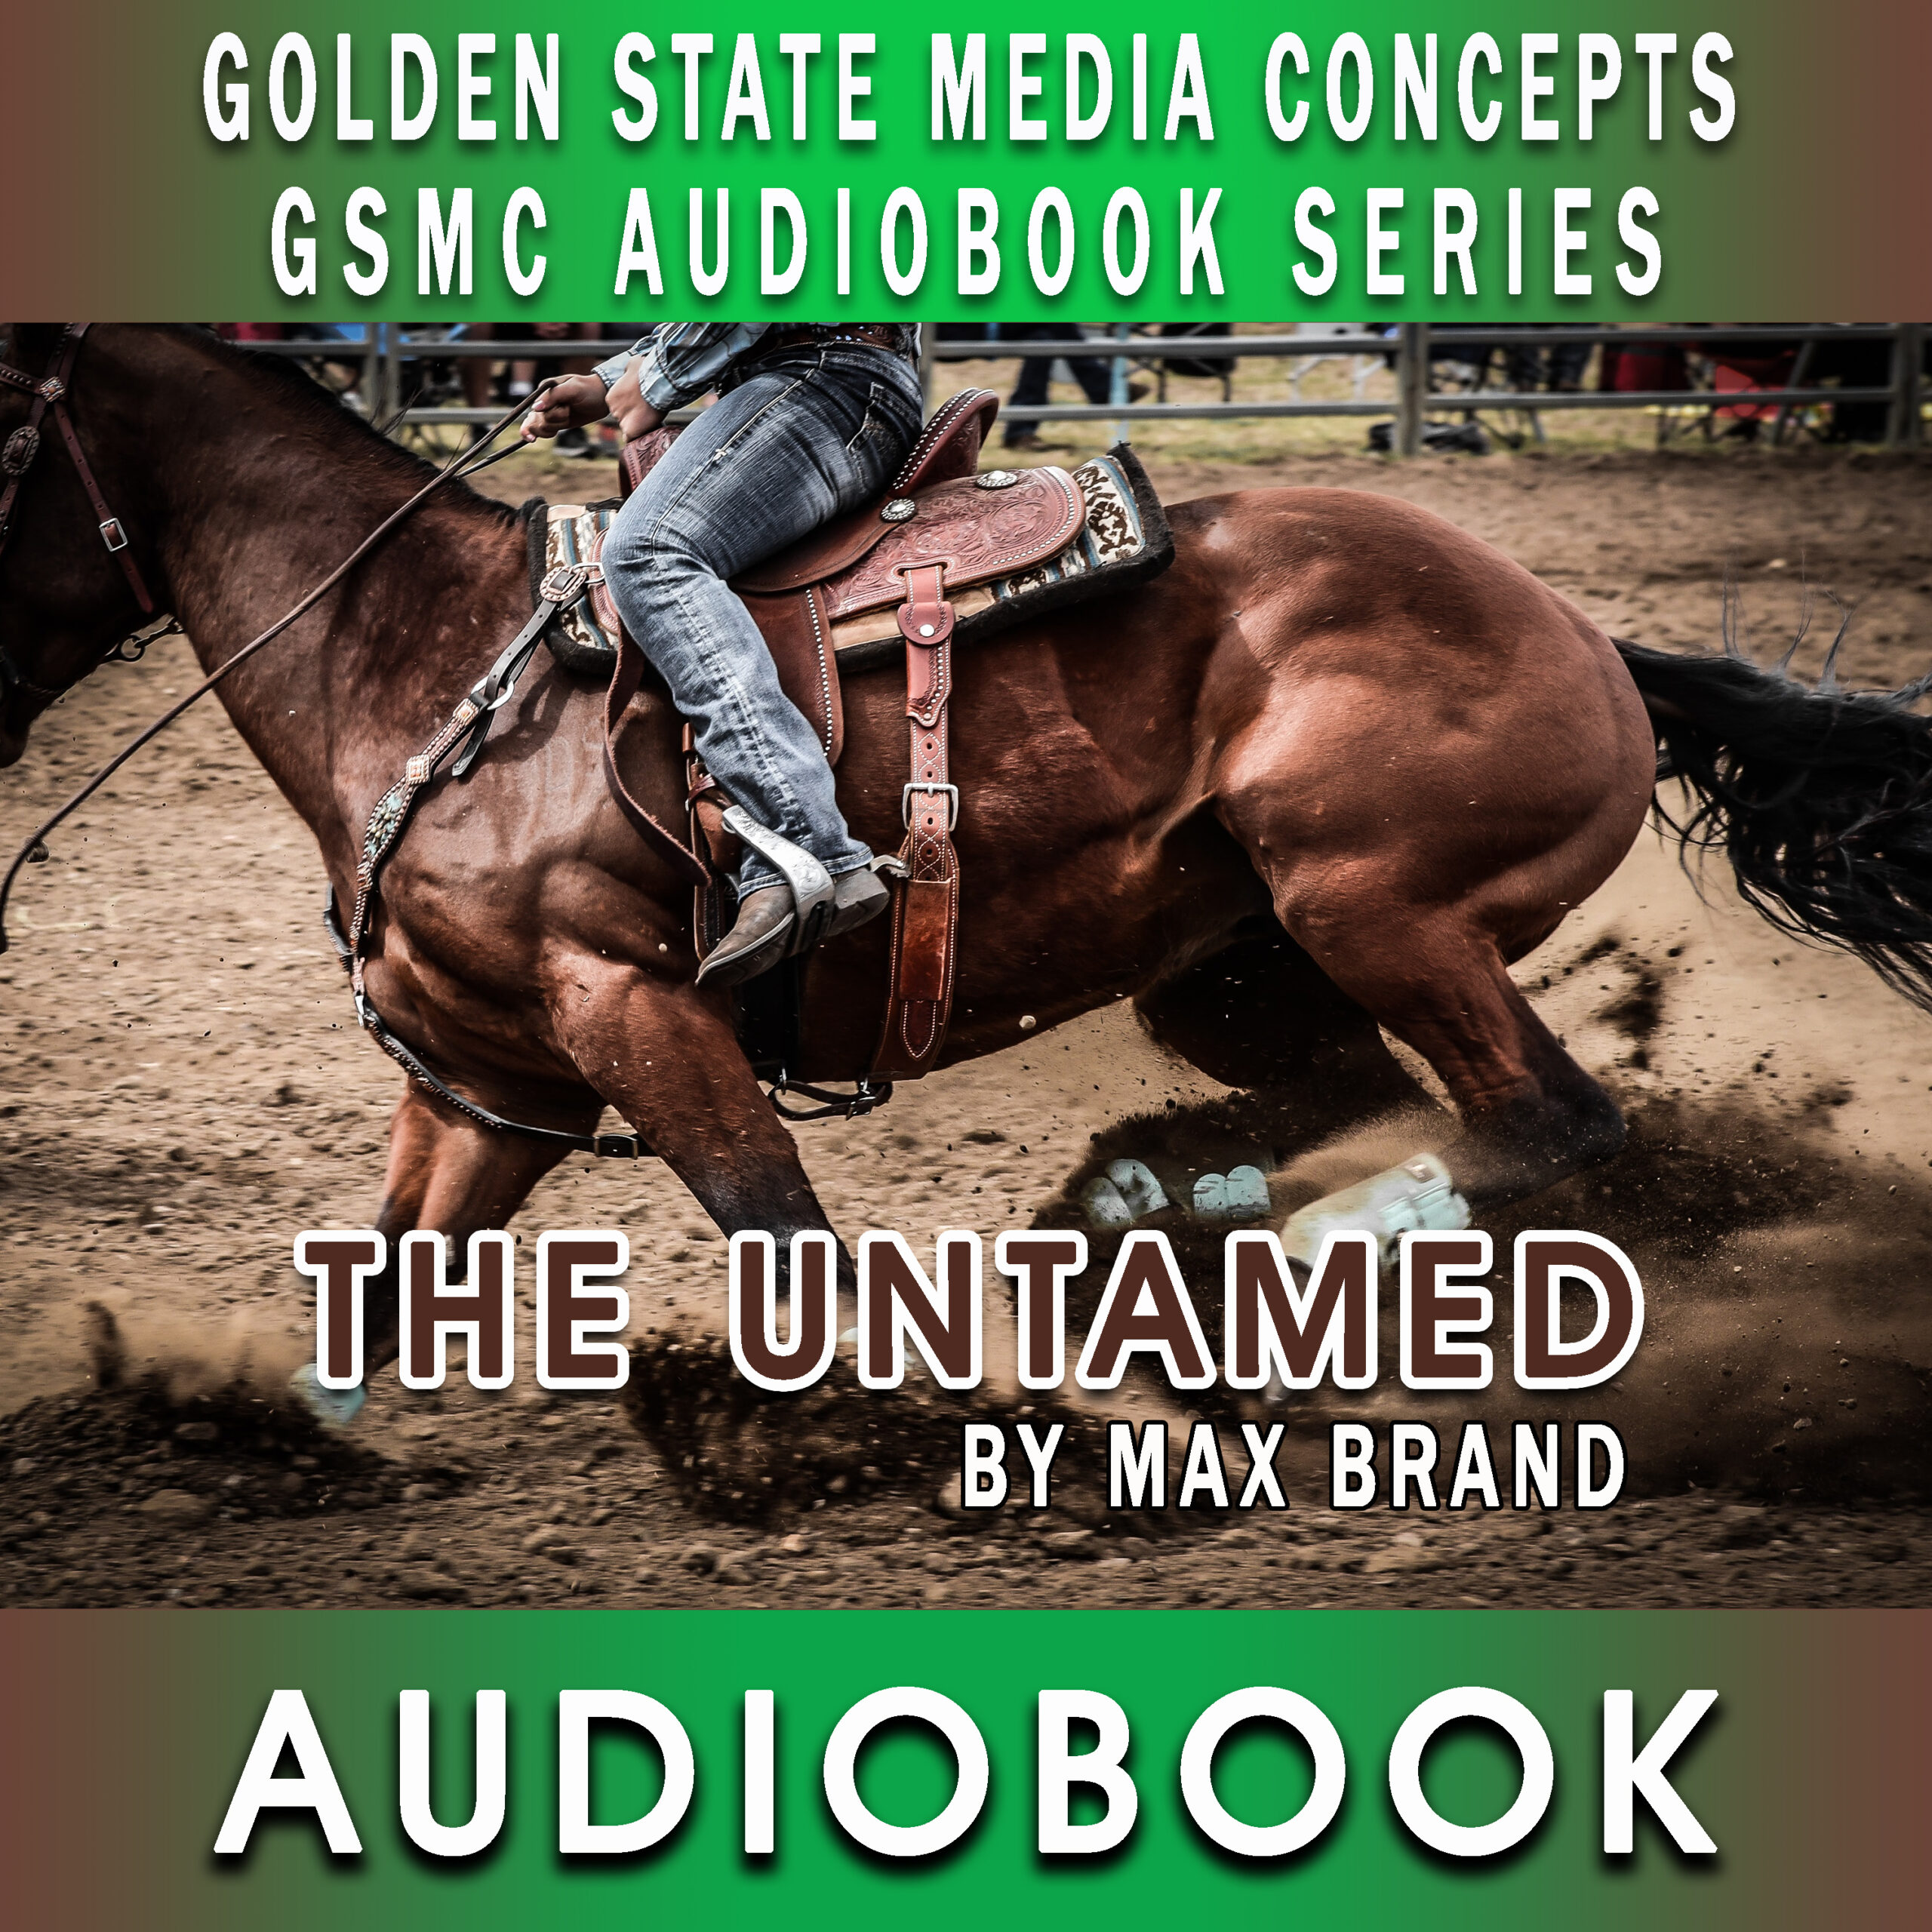 GSMC Audiobook Series: The Untamed by Max Brand